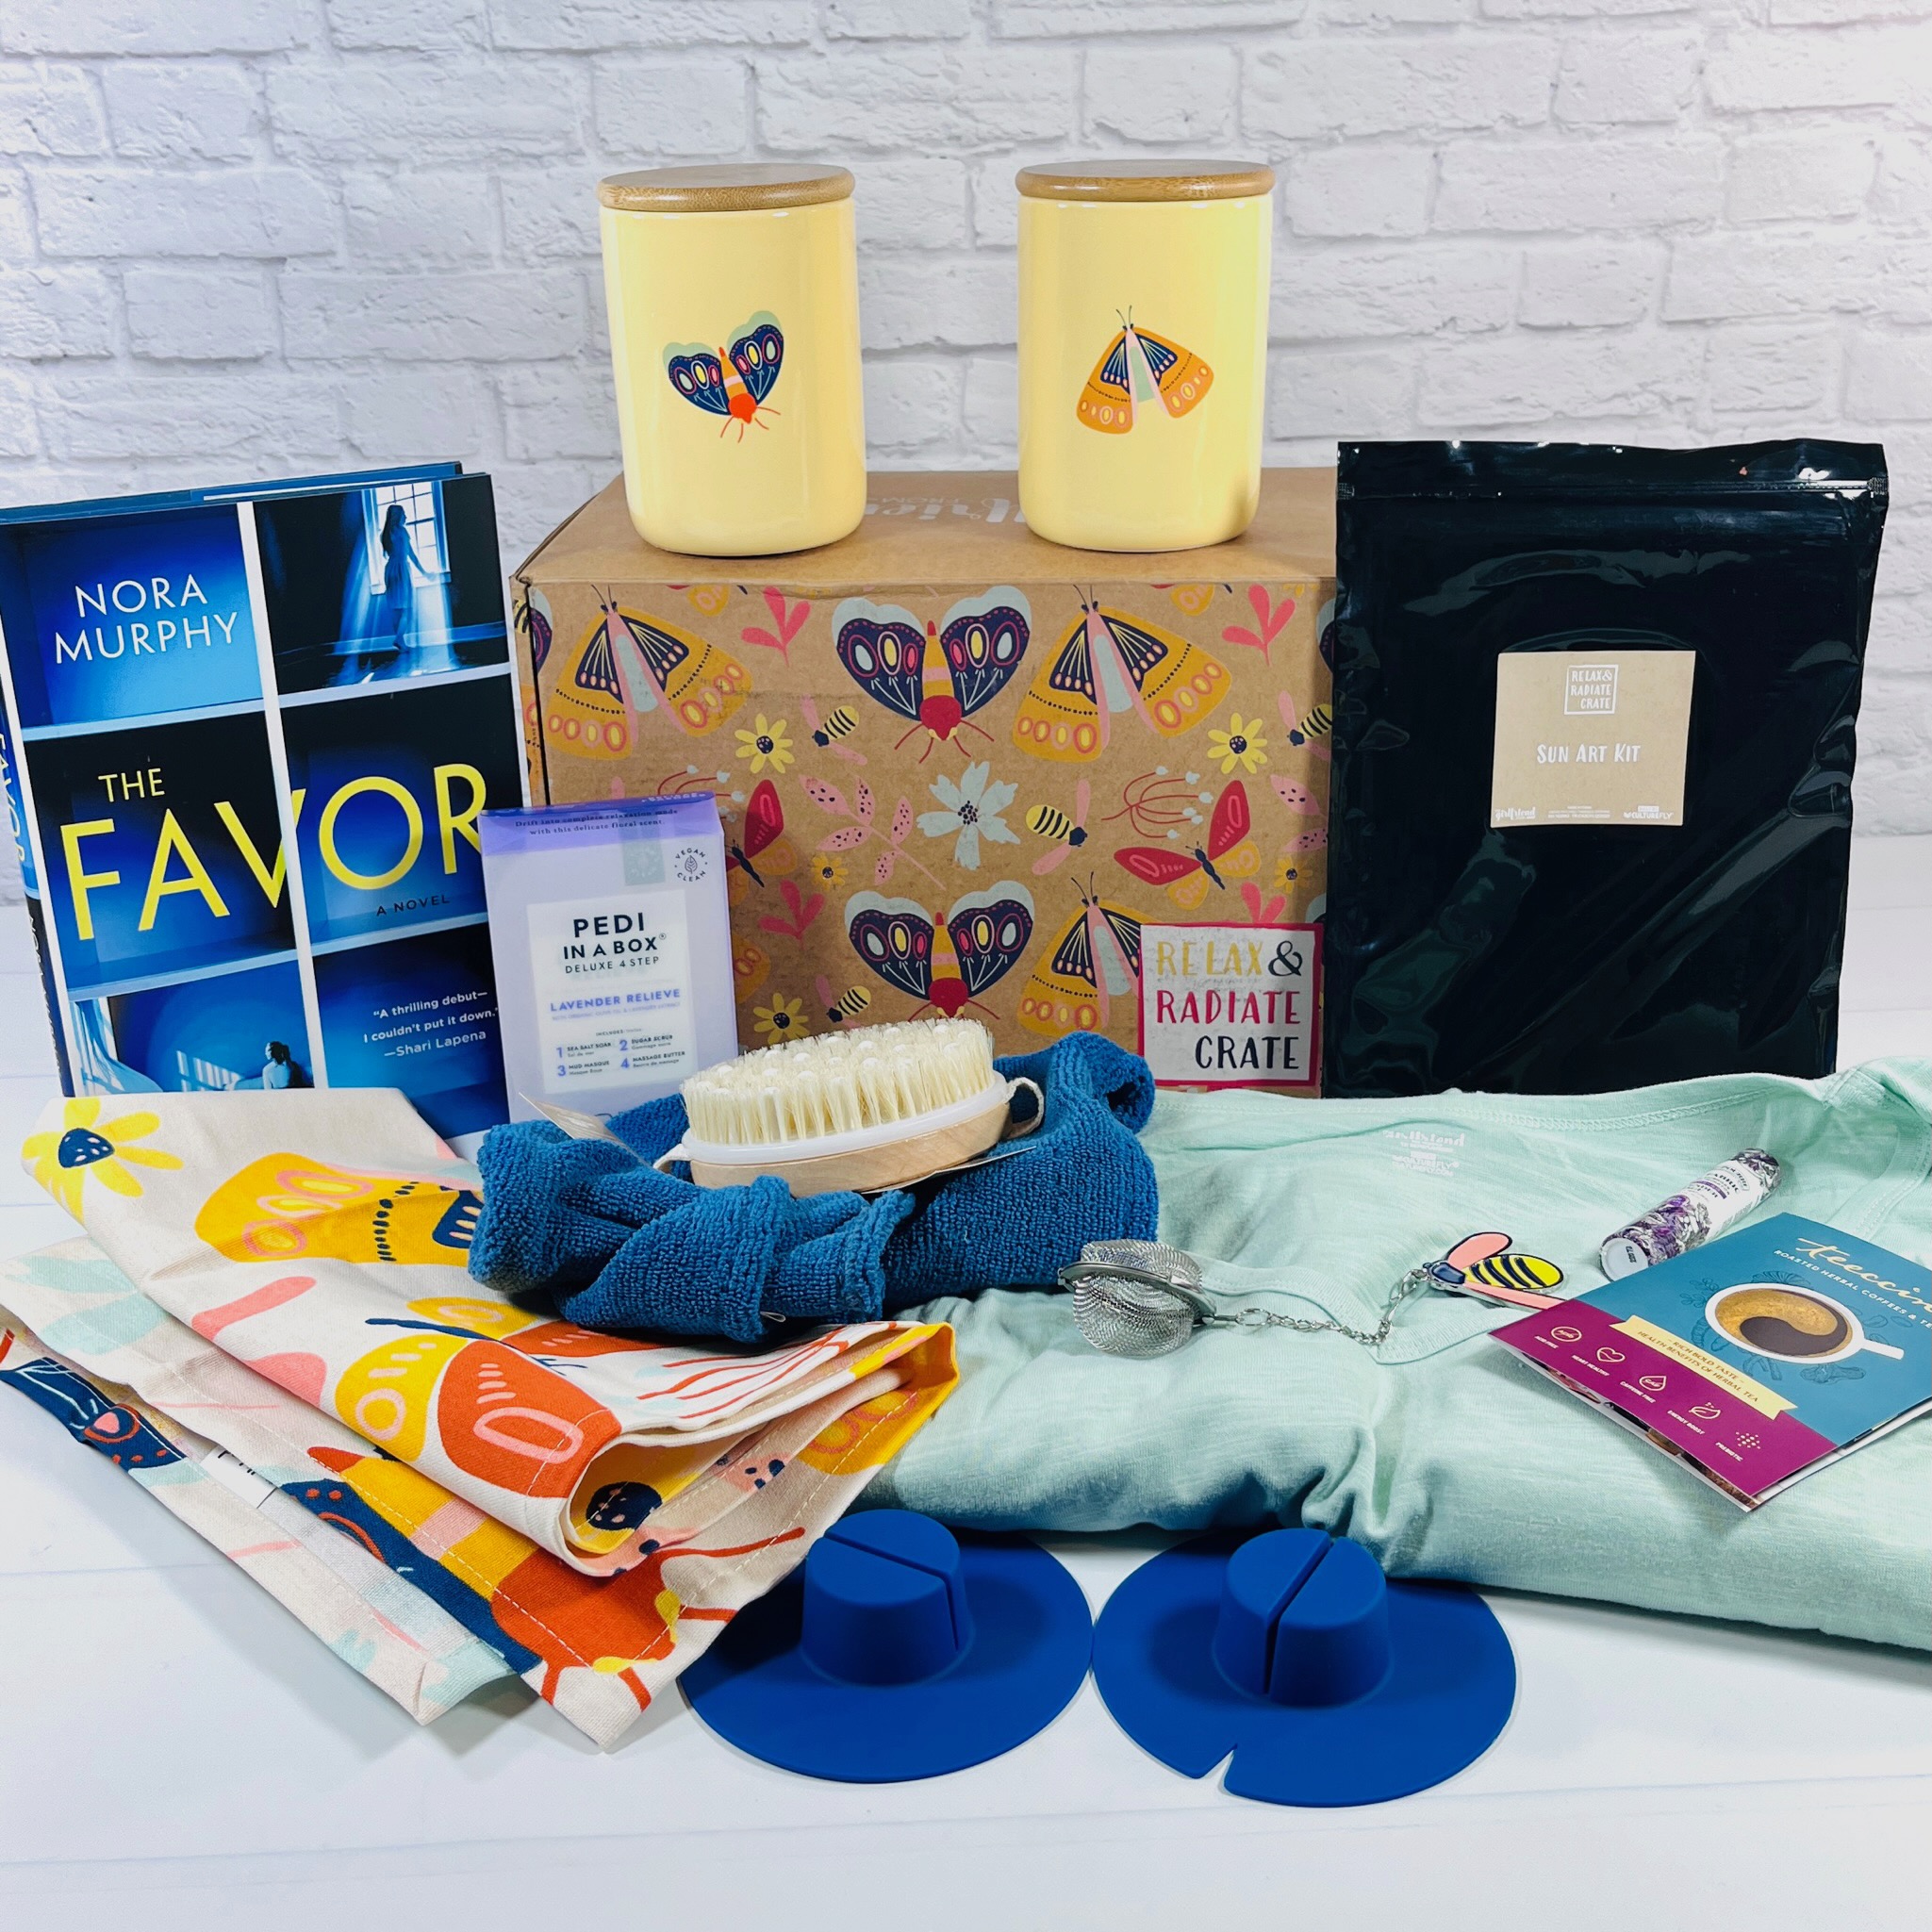 Relax & Radiate Crate Spring 2023 Review Savor & SoakIn! Hello